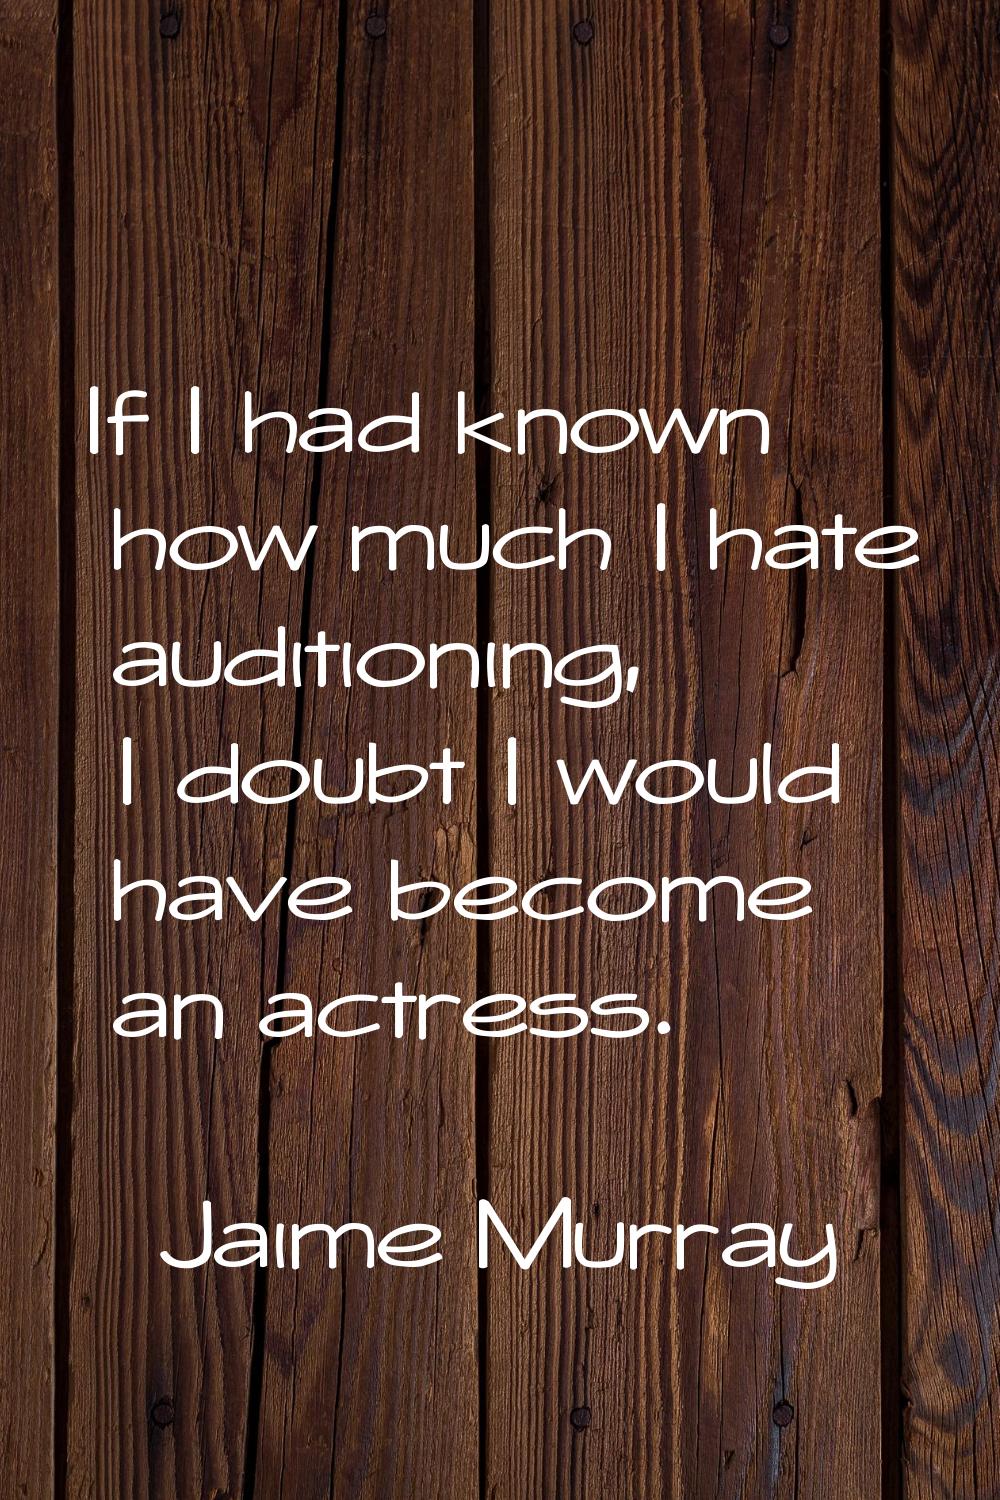 If I had known how much I hate auditioning, I doubt I would have become an actress.